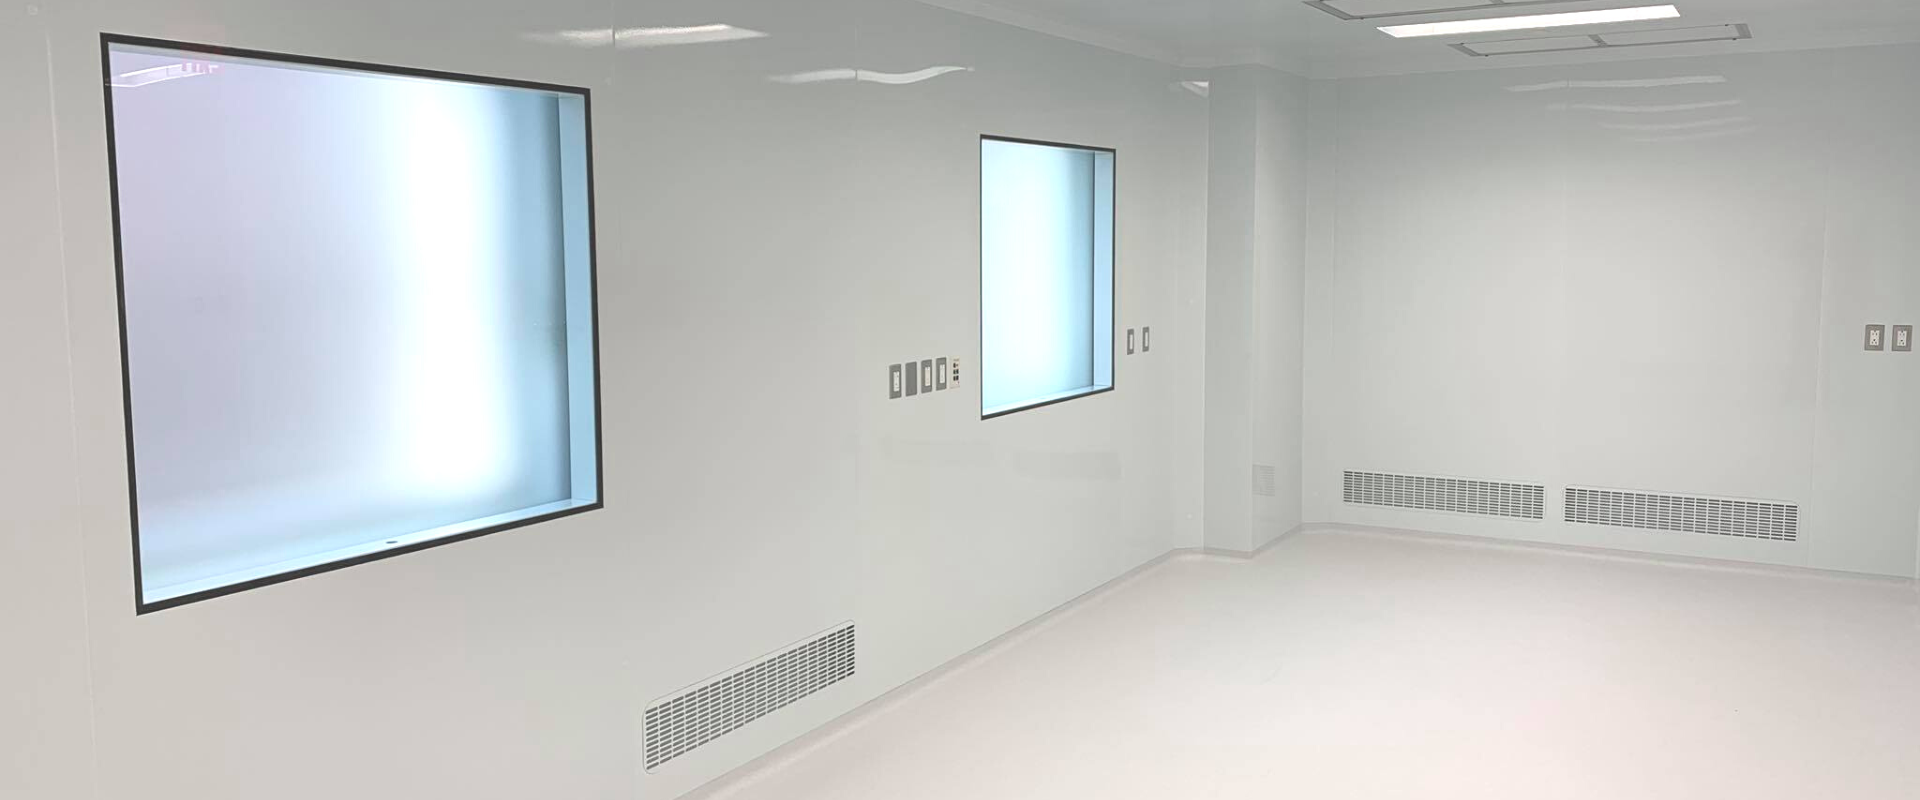 CLINICAL MANUFACTURING FACILITY FOR CELL AND GENE THERAPY – GMP CLEANROOM 1920 x 800 (5)